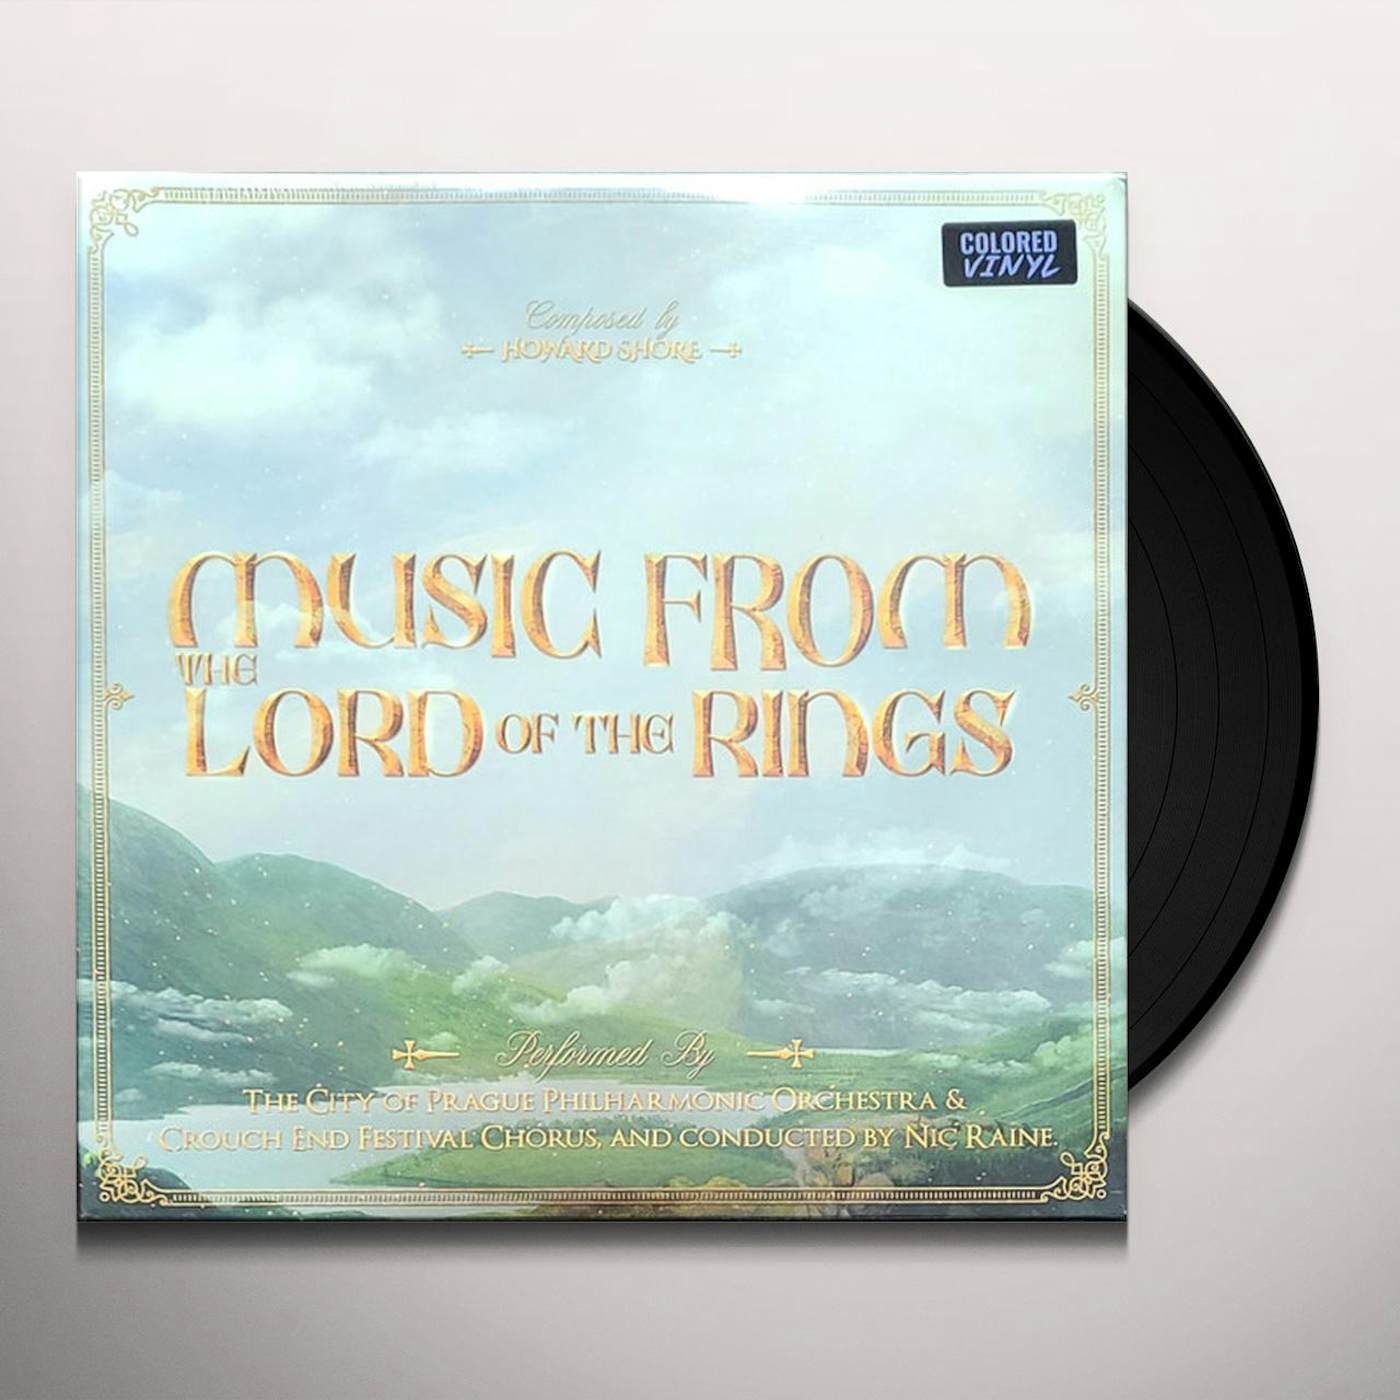 The City of Prague Philharmonic Orchestra LORD OF THE RINGS TRILOGY - Original Soundtrack Vinyl Record